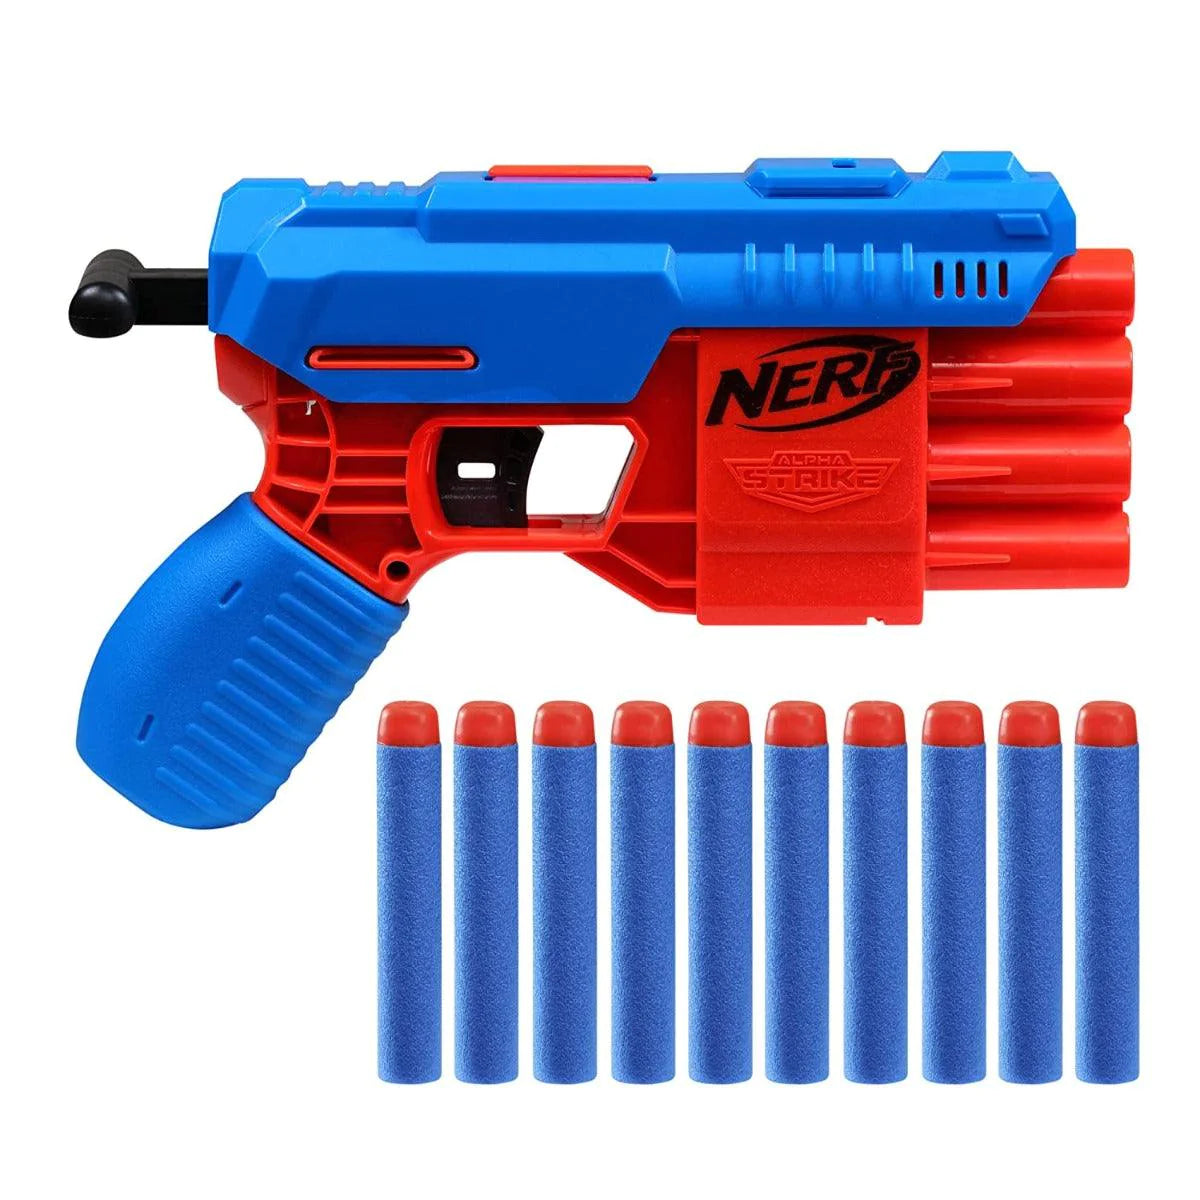 Nerf Alpha Strike Fang QS-4 Blaster, 4-Dart Blasting Fire 4 Darts In A Row, 10 Official Nerf Elite Darts Easy Load-Prime-Fire